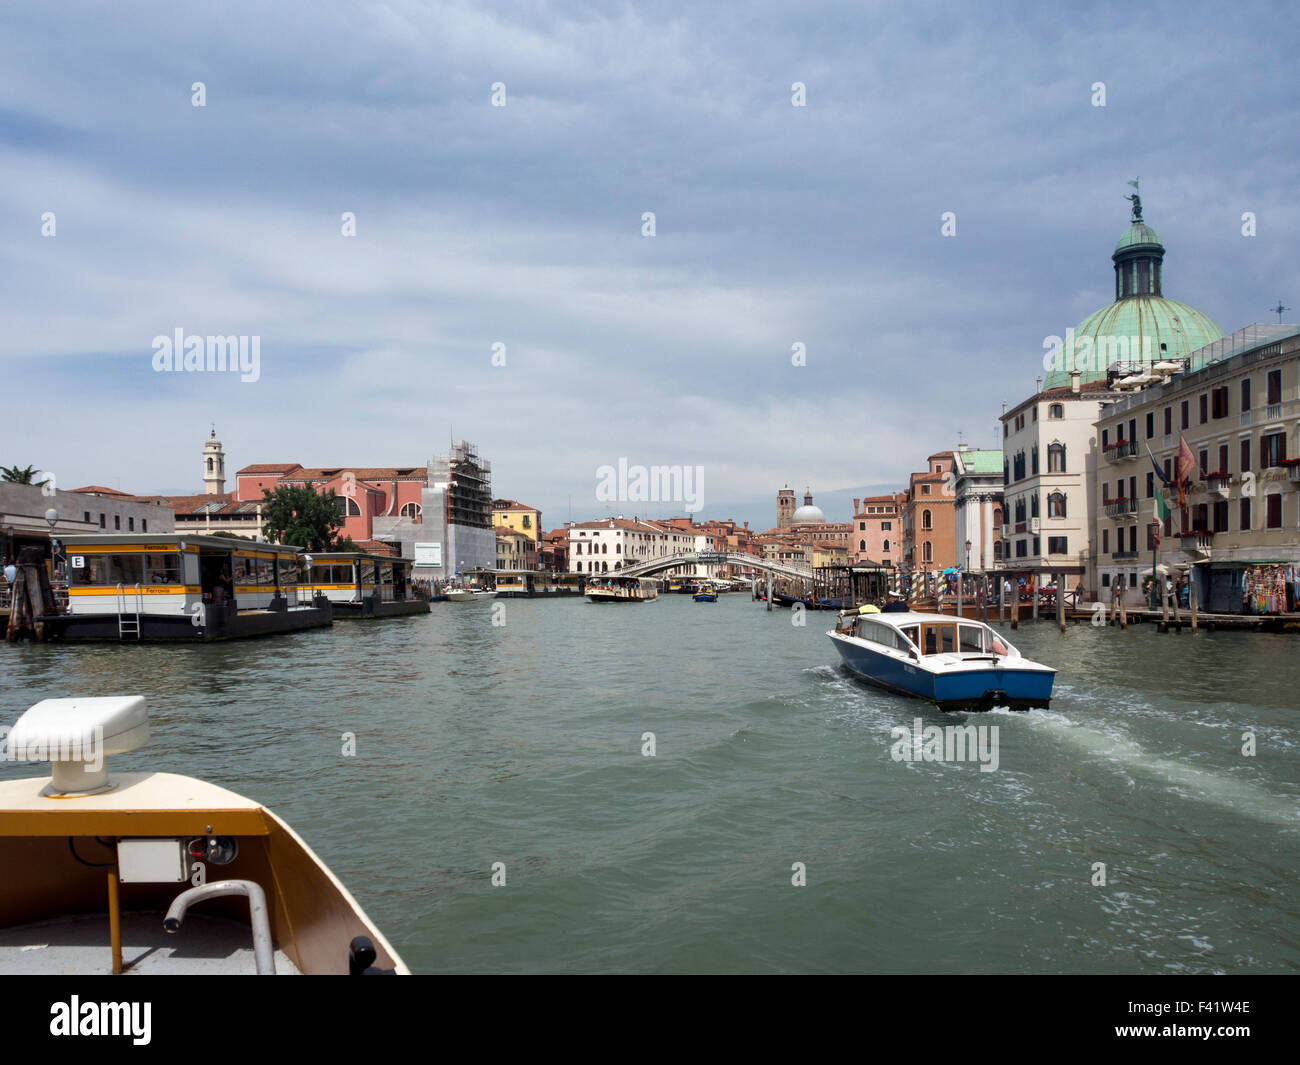 View along th Grand Canal and the magnificent buildings that line it, Venice Stock Photo